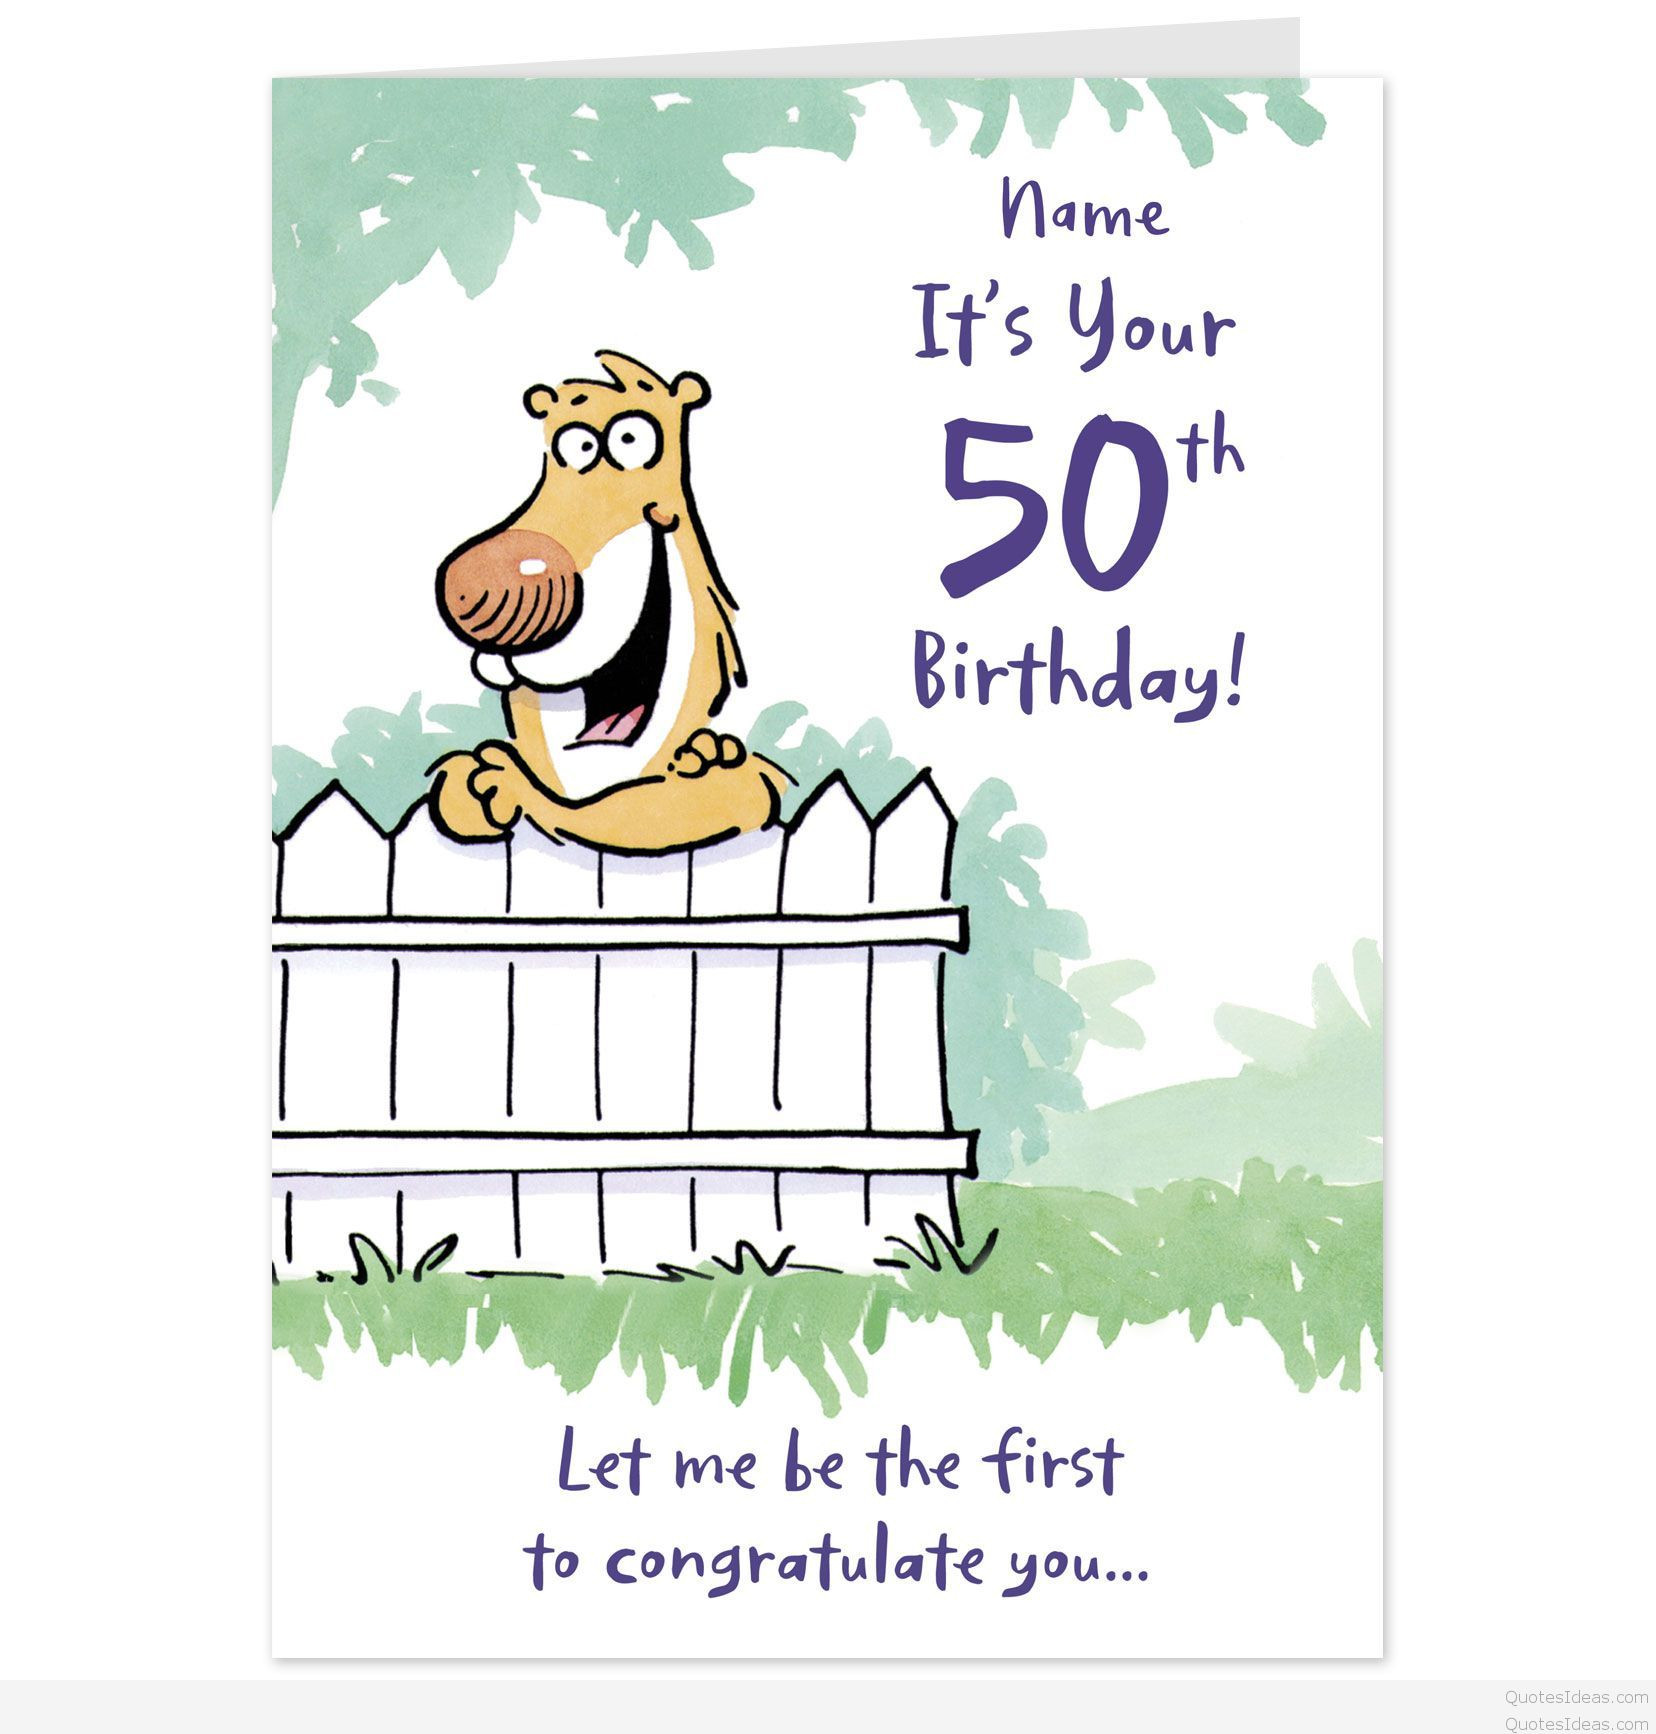 Funny Birthday Card Quotes
 Latest funny cards quotes and sayings